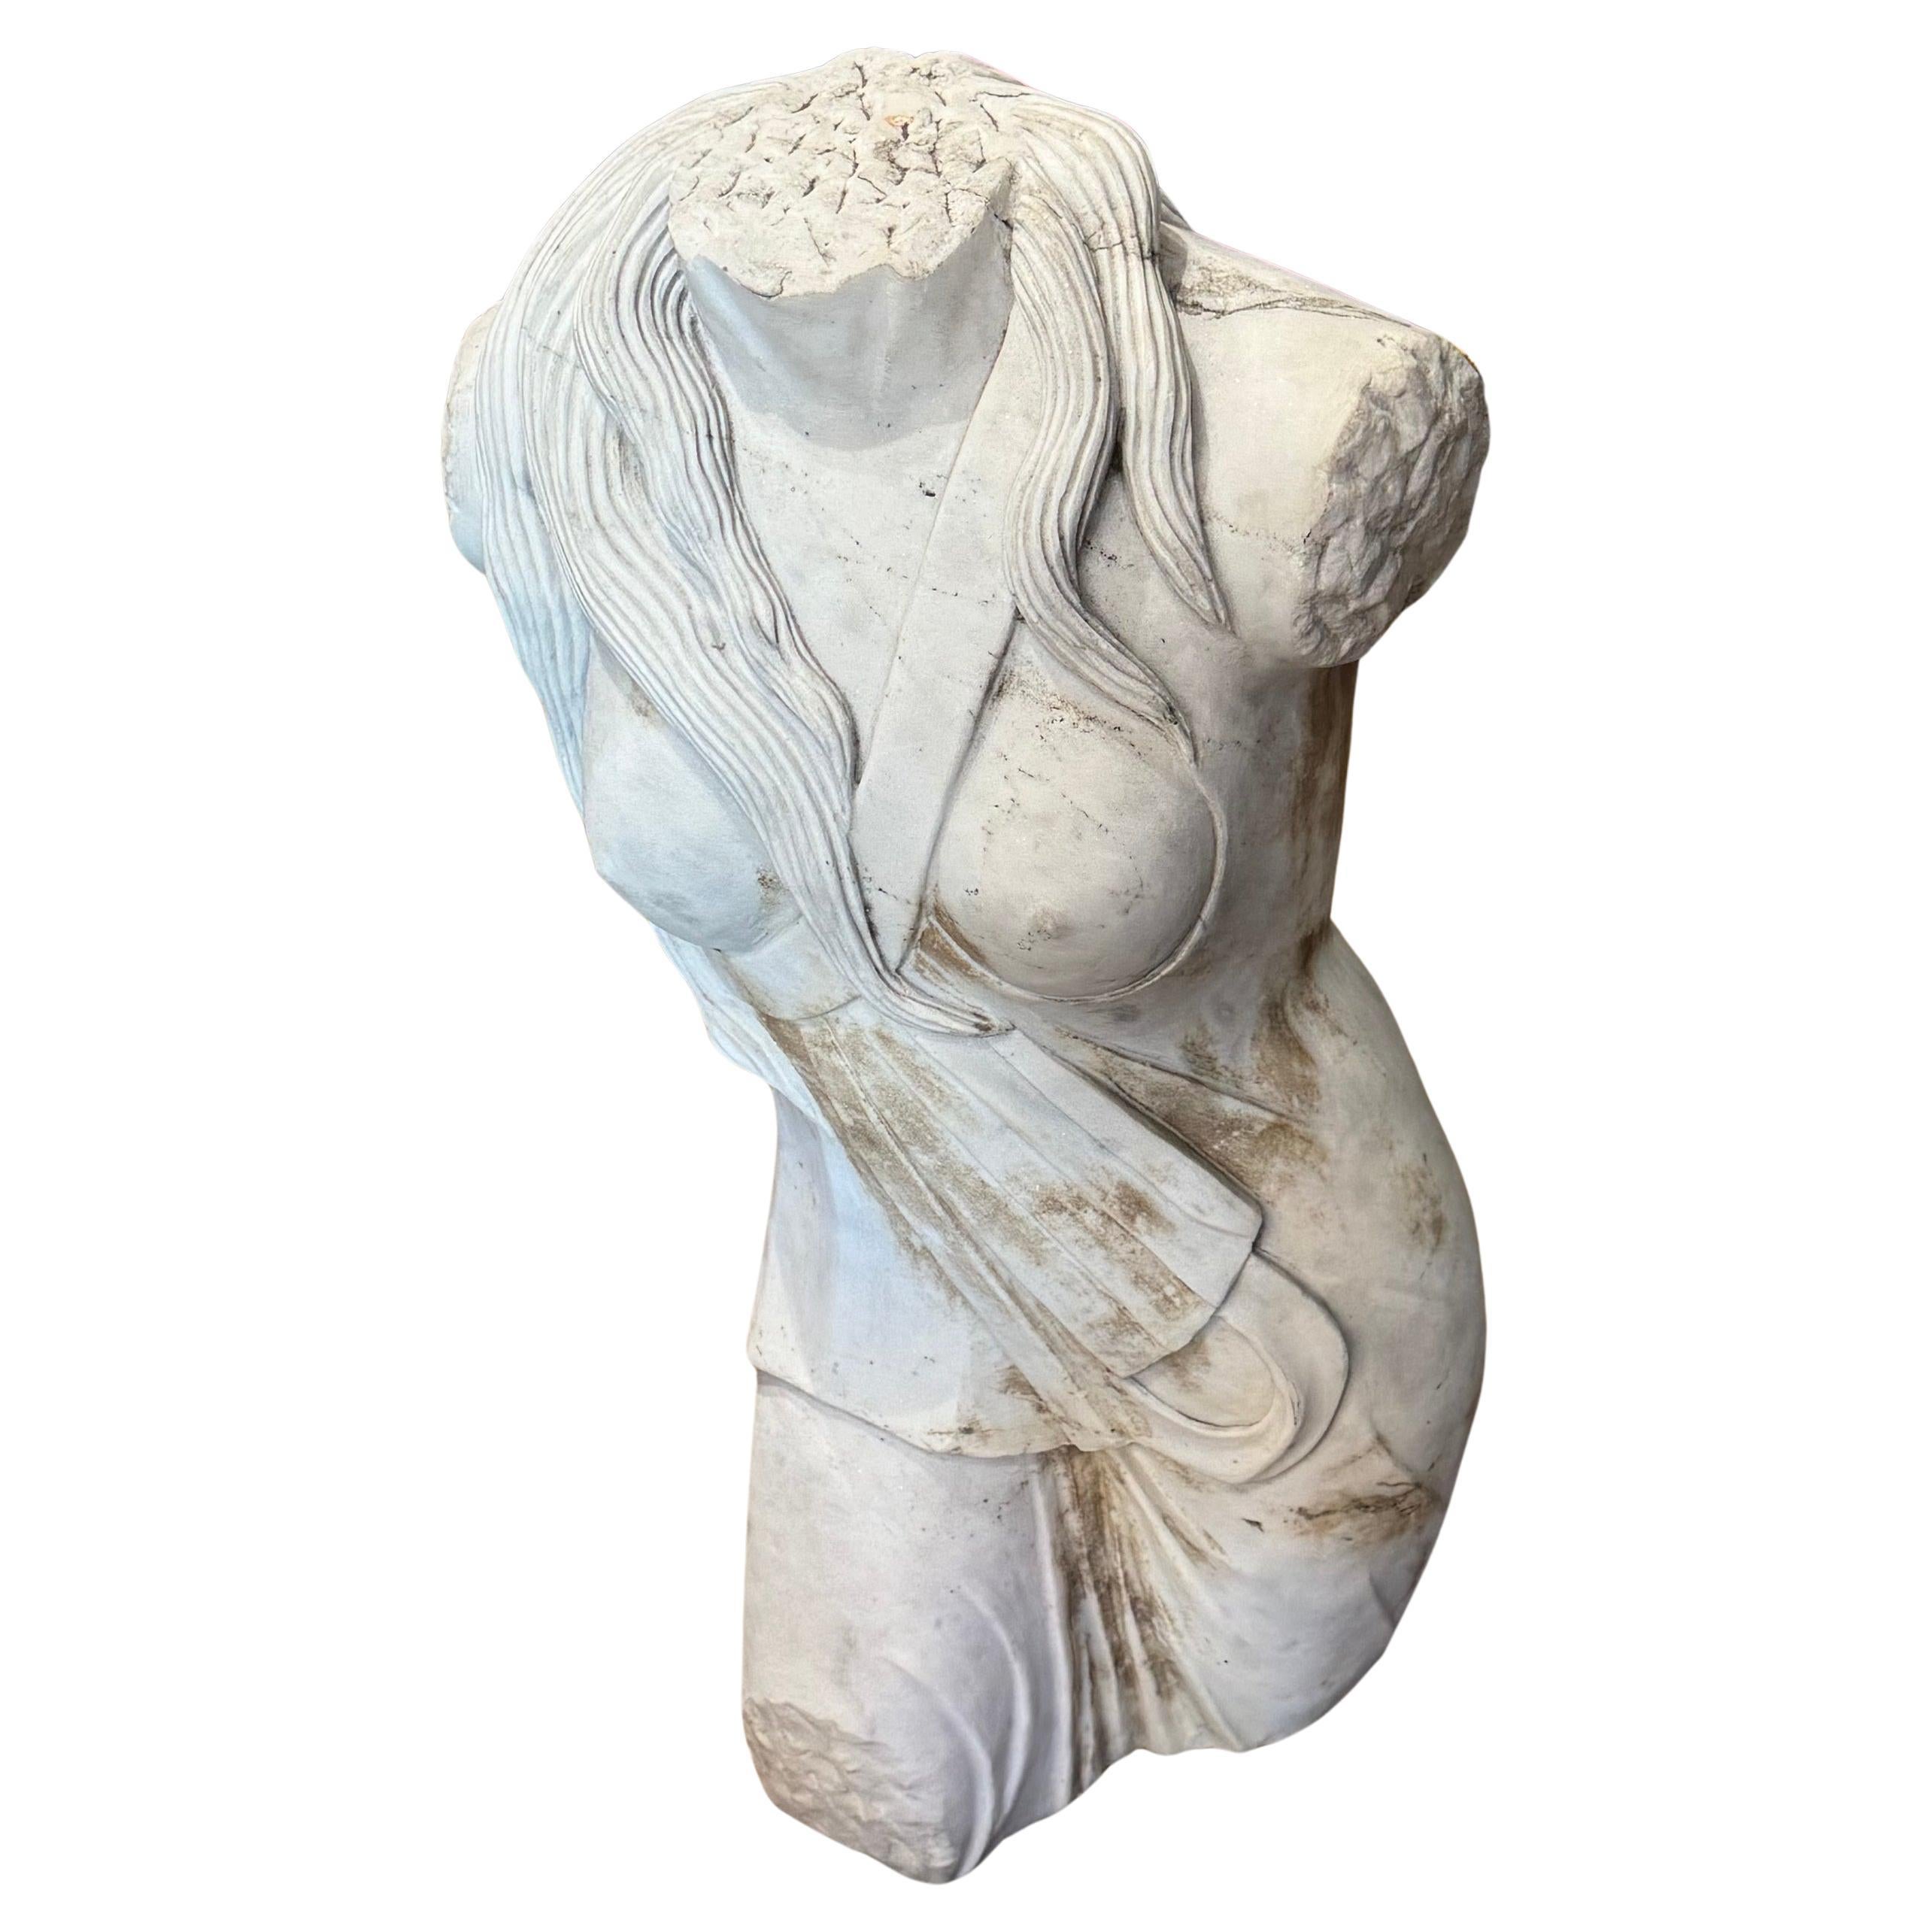 The sculpture has a distinctly Art Deco flavor even though it  's copied from an ancient statue.
Grandly scaled & highly unusual in its bold appearance, the sculpture is solid statuary marble with a carved flat, base, for easy installation on a